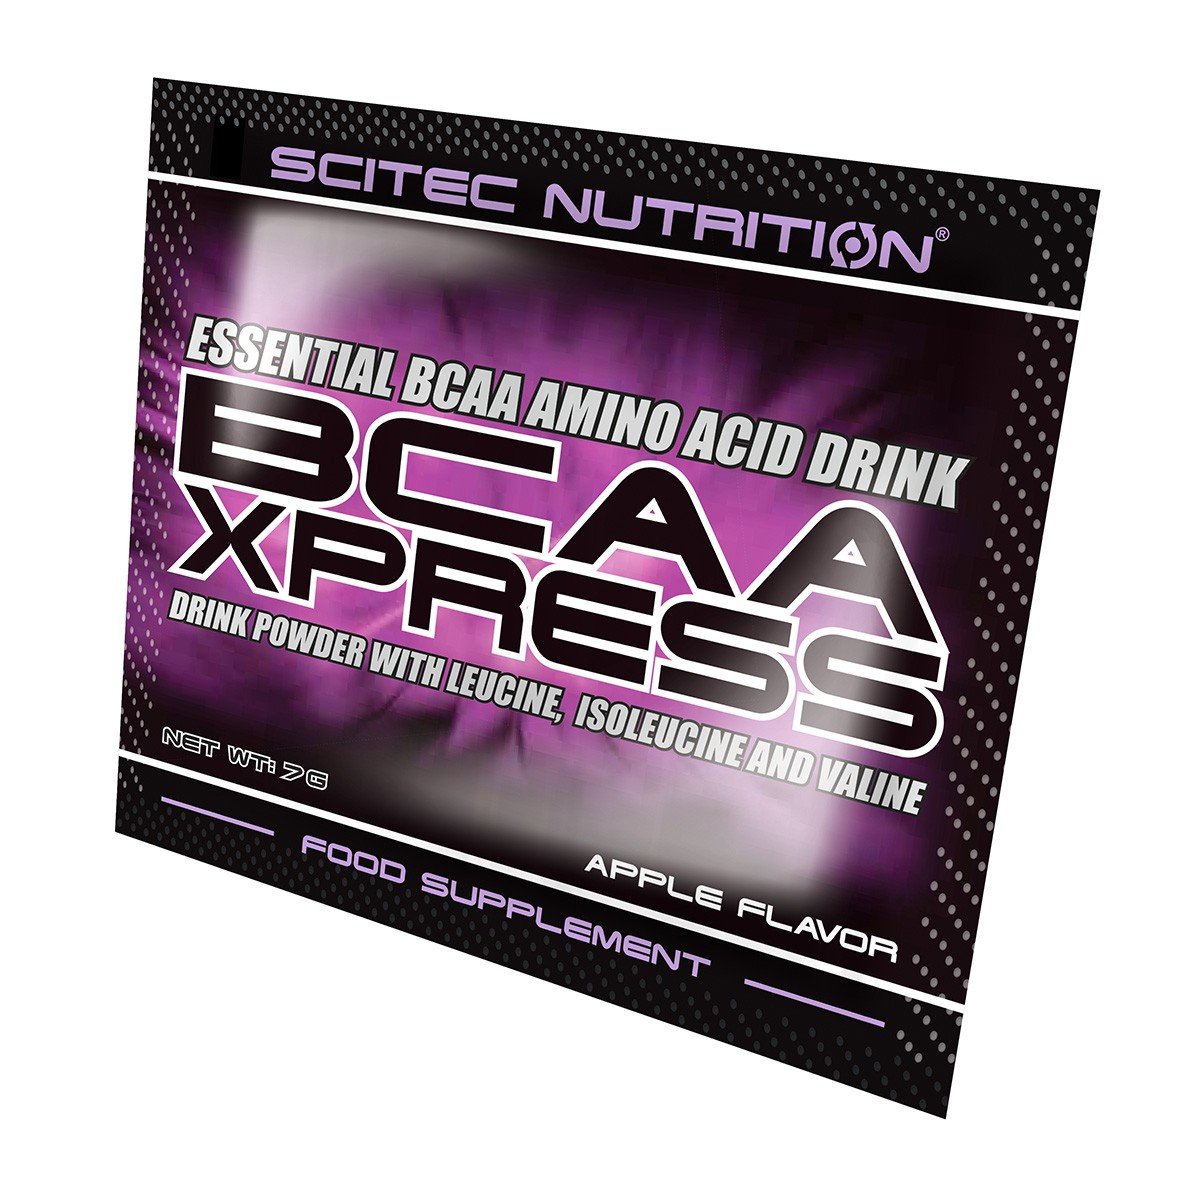 BCAA Xpress, 1 pcs, Scitec Nutrition. BCAA. Weight Loss recovery Anti-catabolic properties Lean muscle mass 